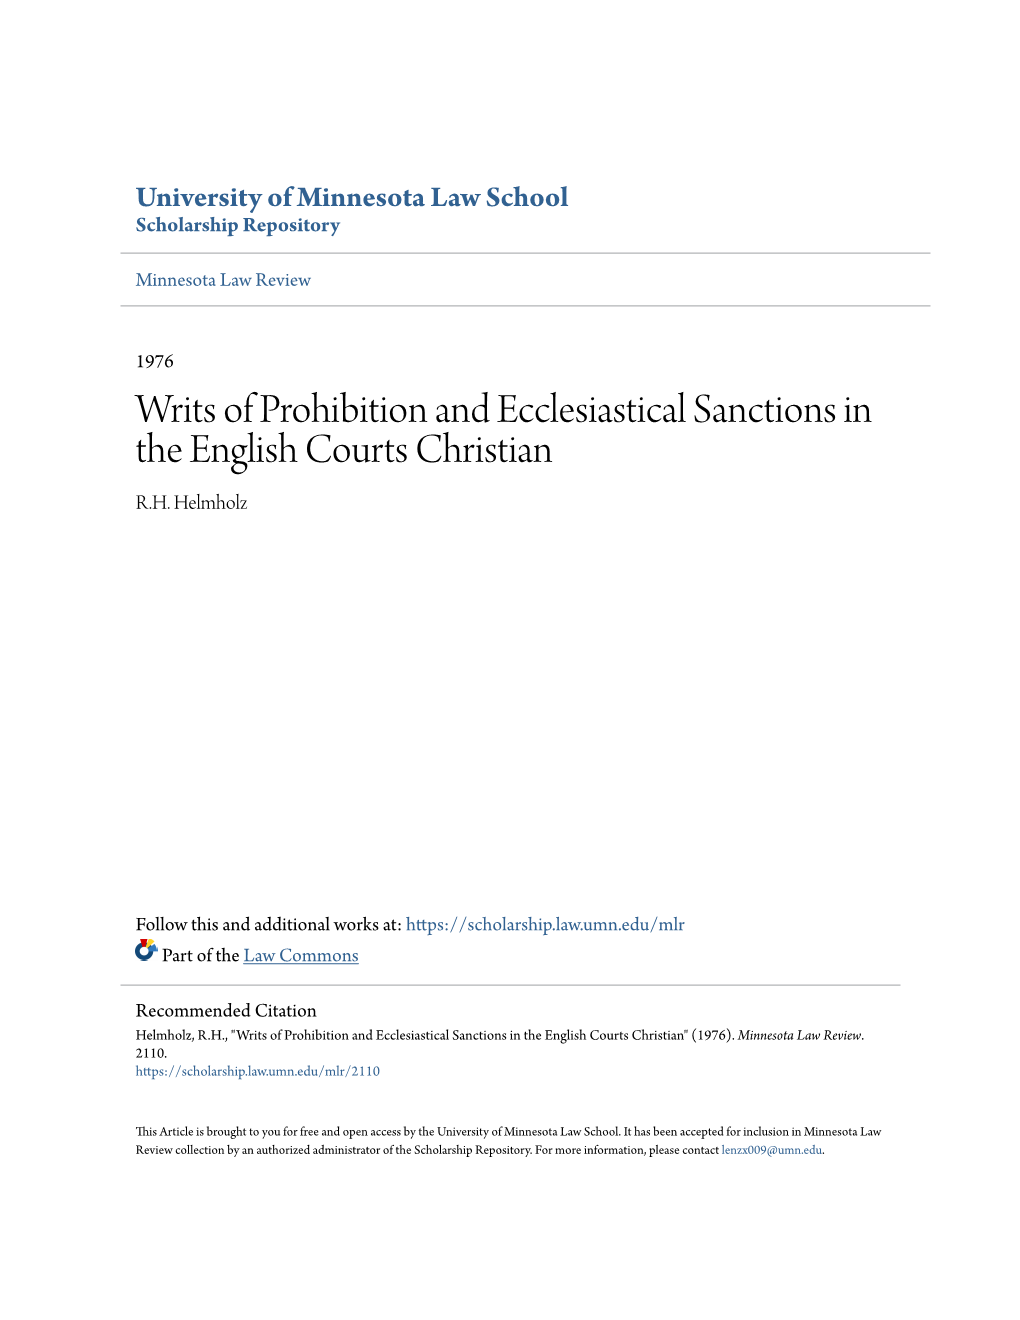 Writs of Prohibition and Ecclesiastical Sanctions in the English Courts Christian R.H